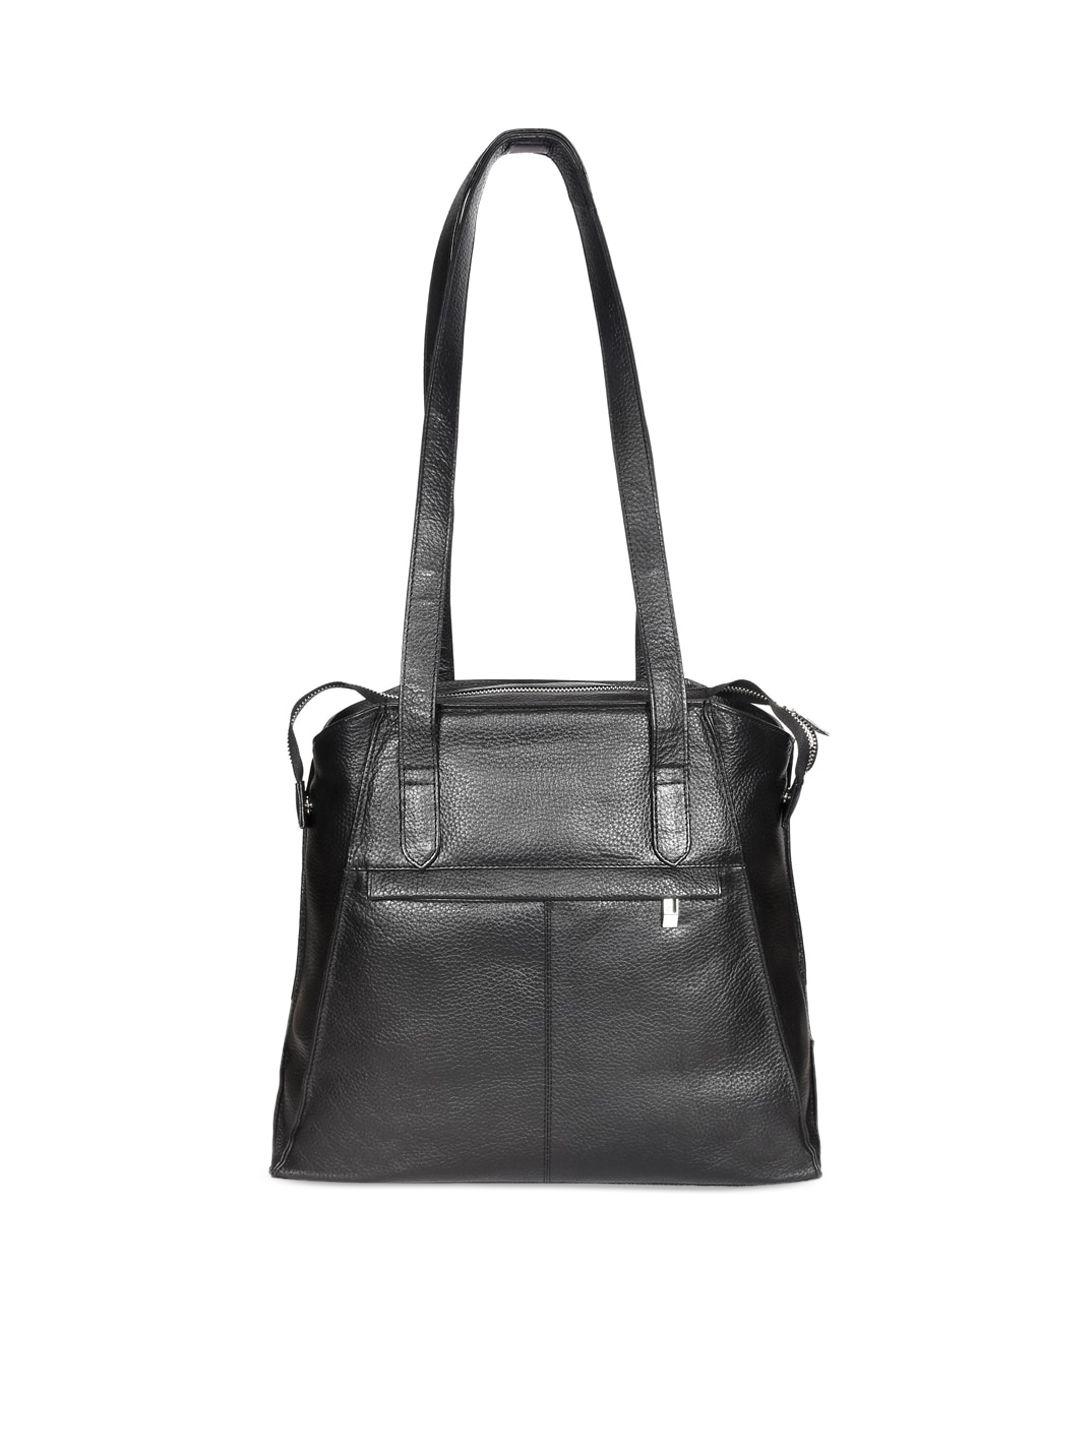 sassora textured leather structured tote bag